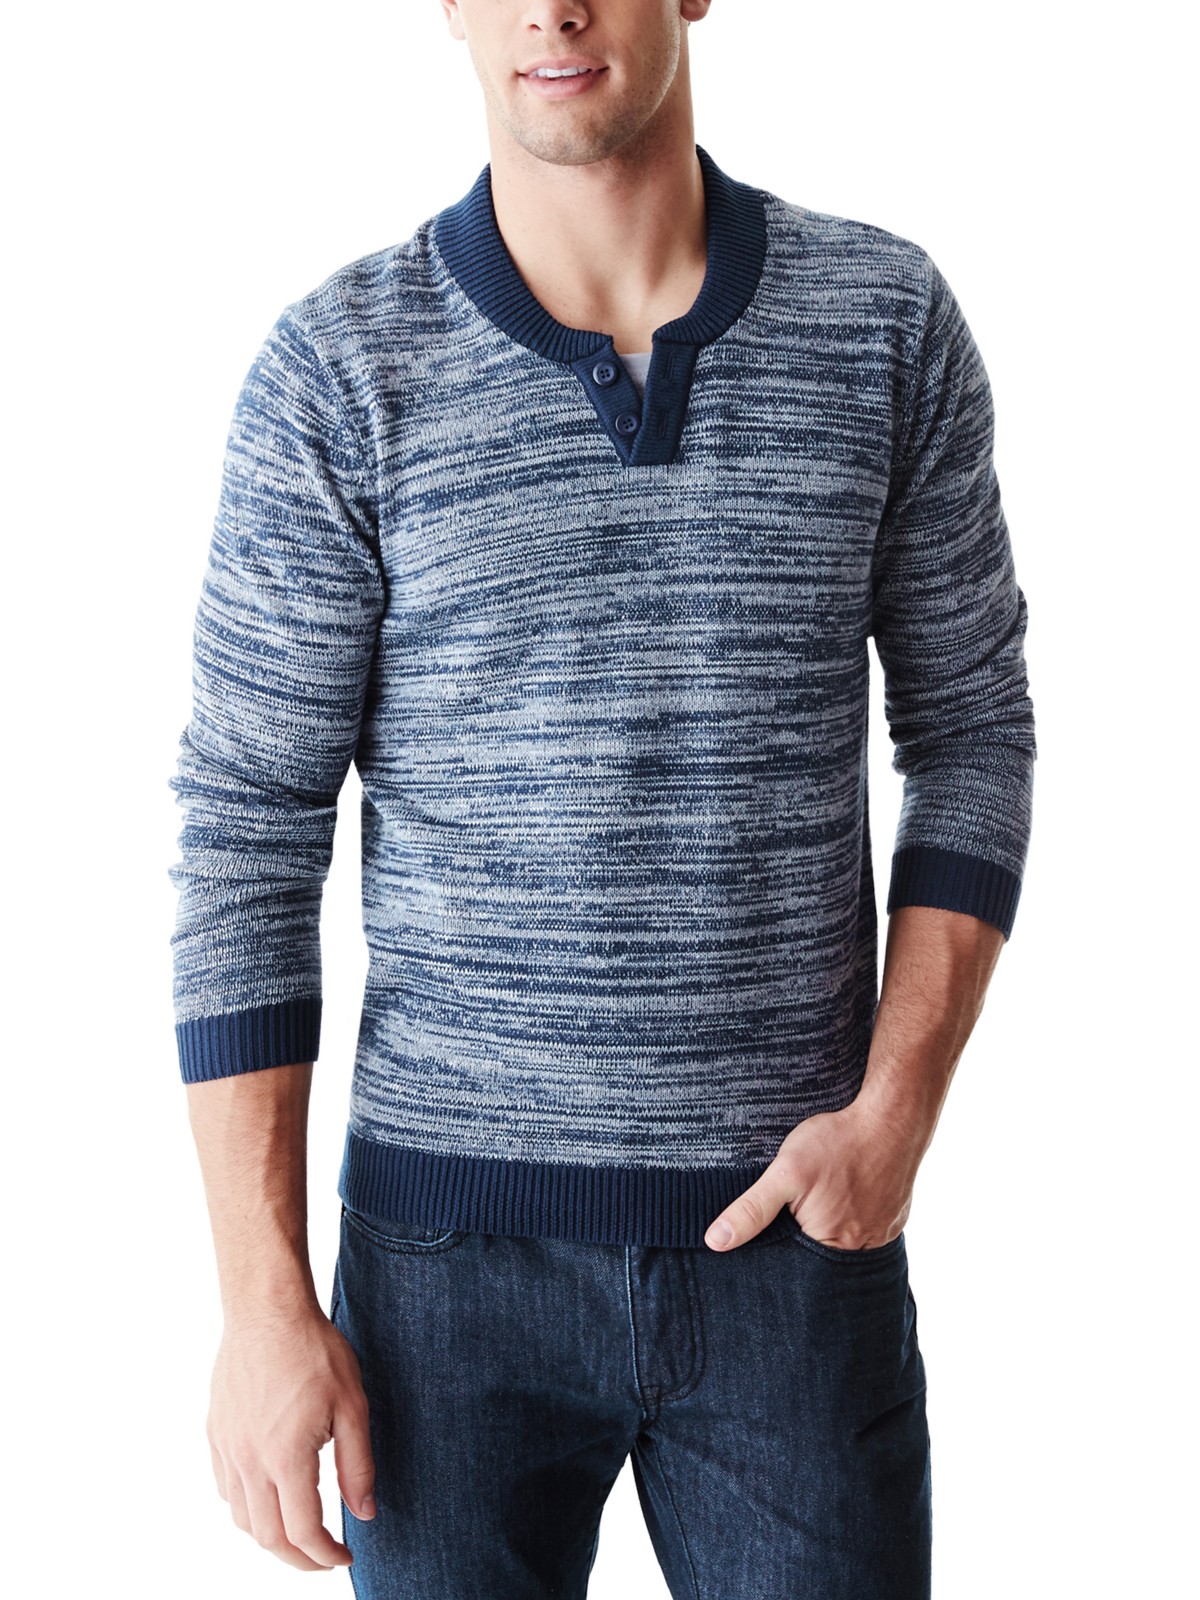 GUESS Men's Zink Marled Pullover Sweater | eBay